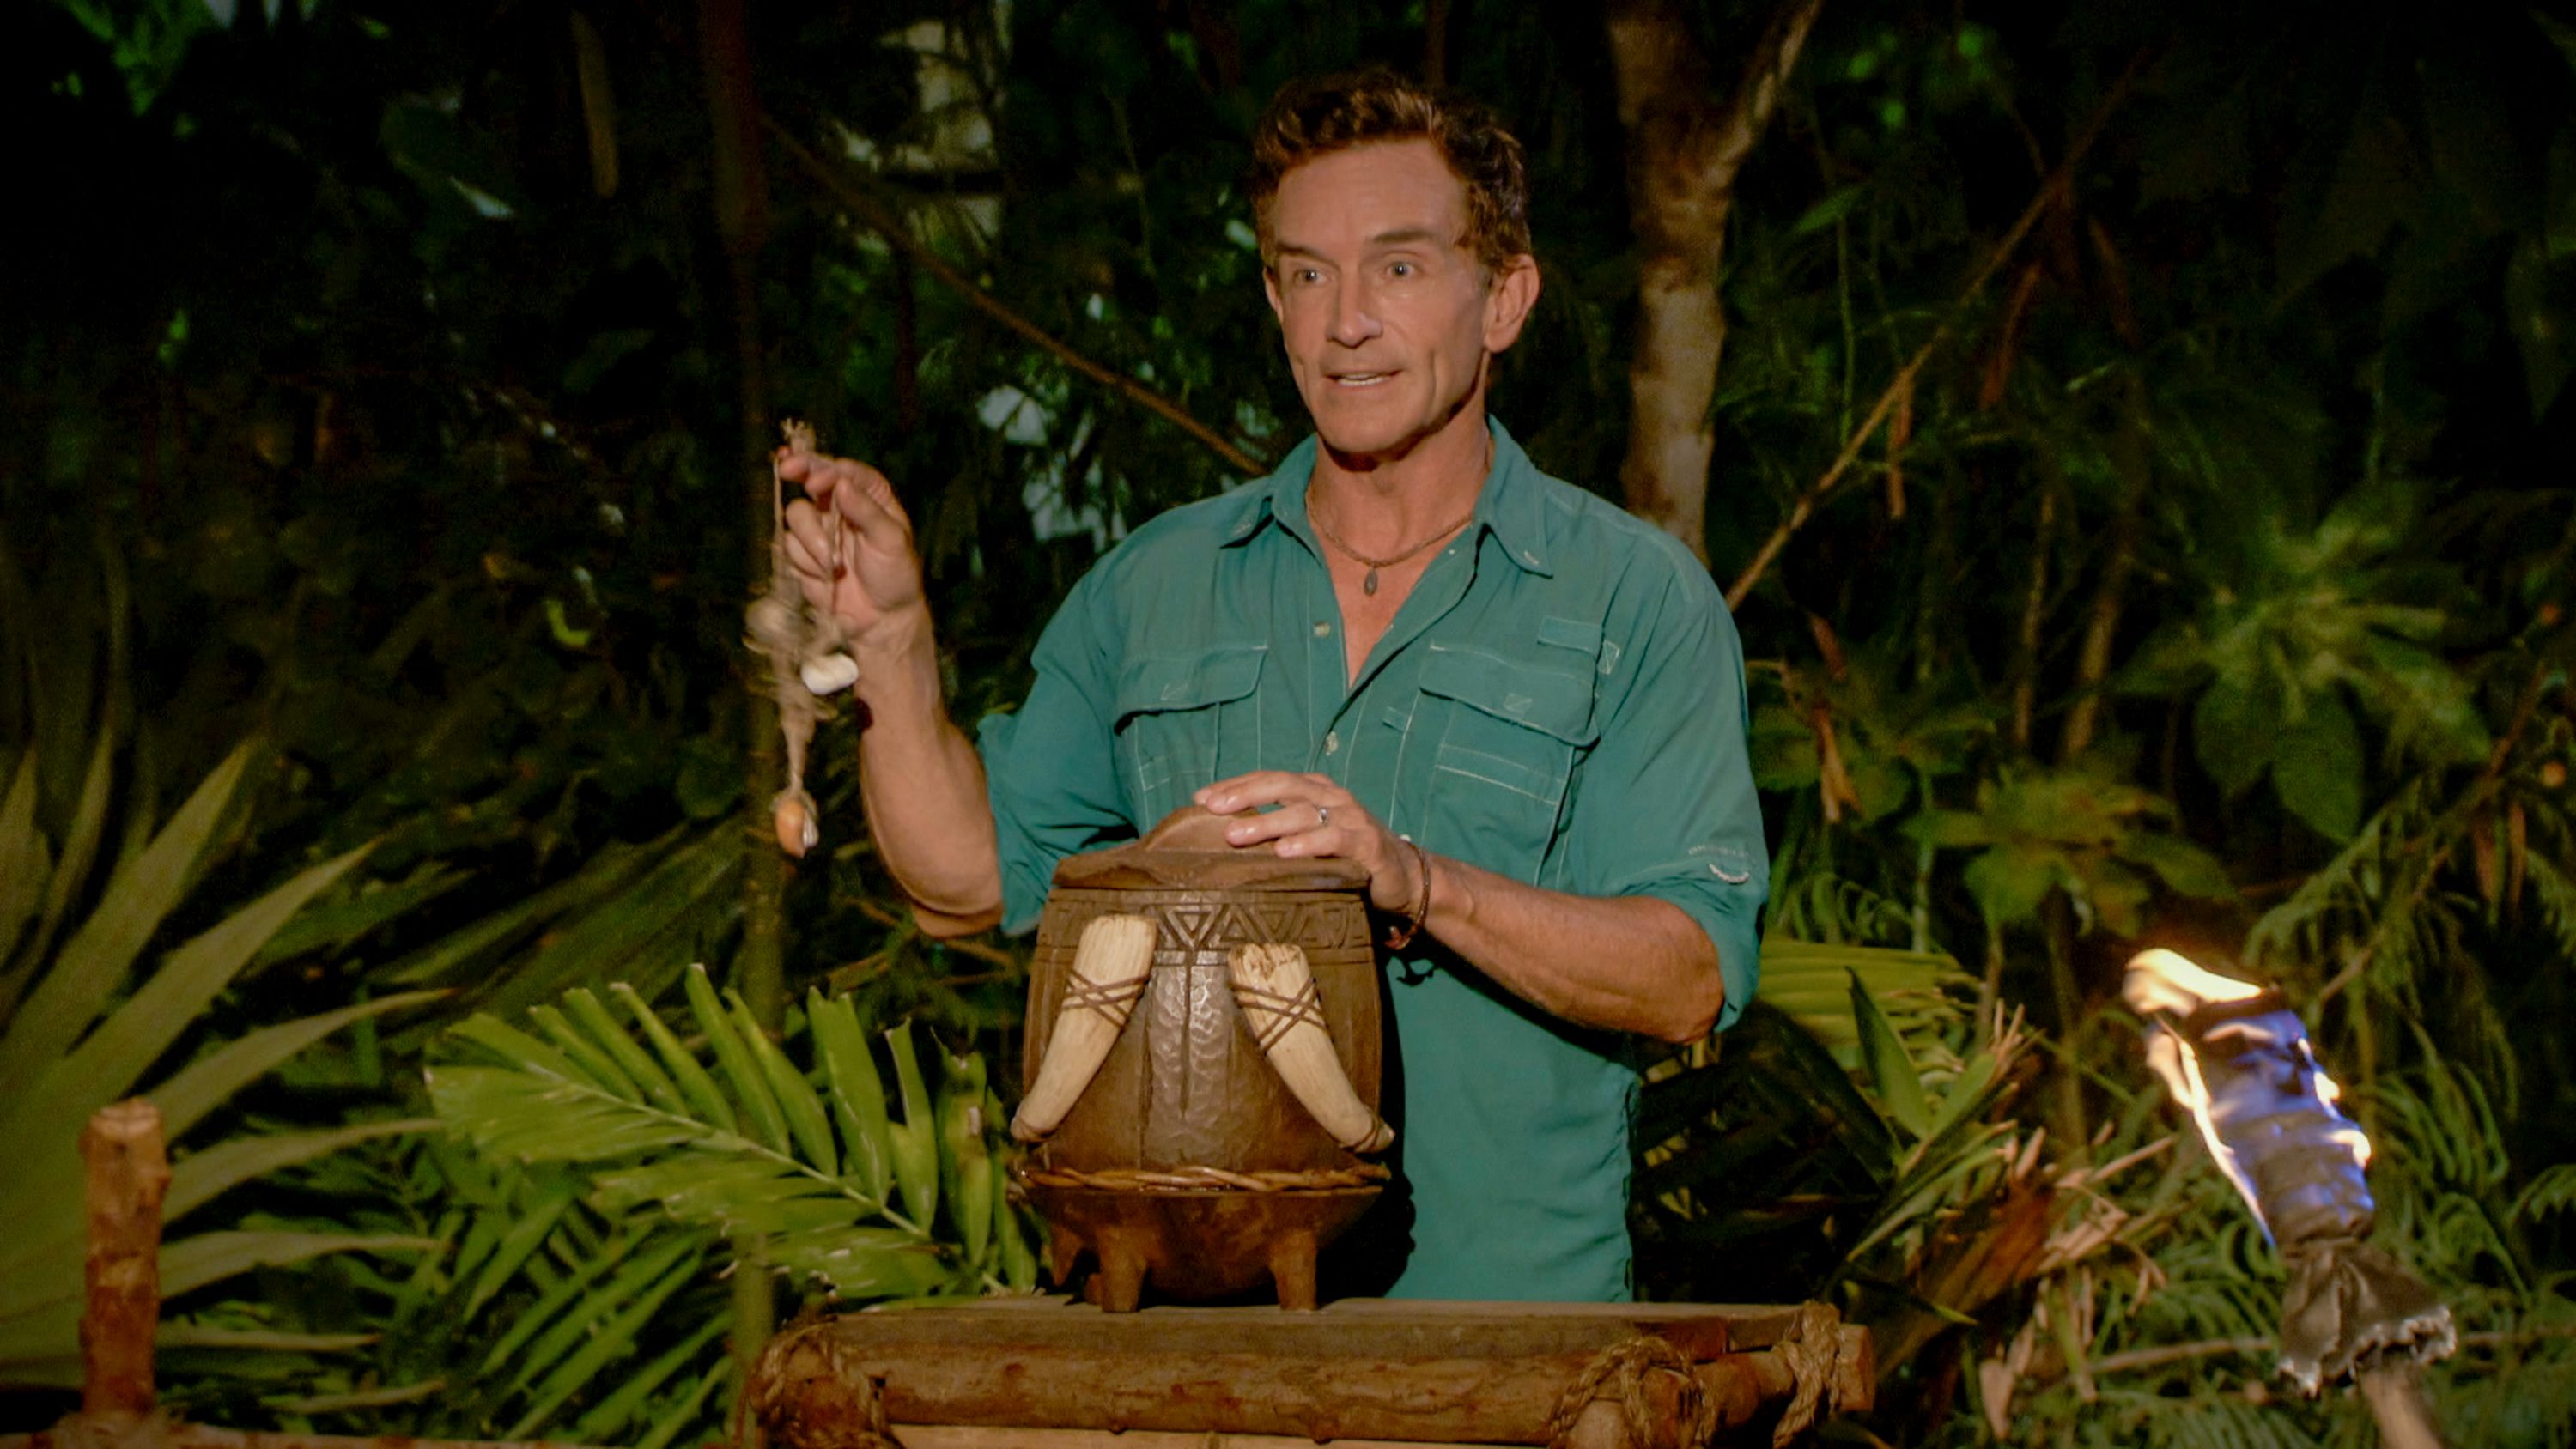 Jeff Probst at Tribal Council on "Survivor: Island of Idols" on Mana Island on November 22, 2019. | Source: CBS/Getty Images